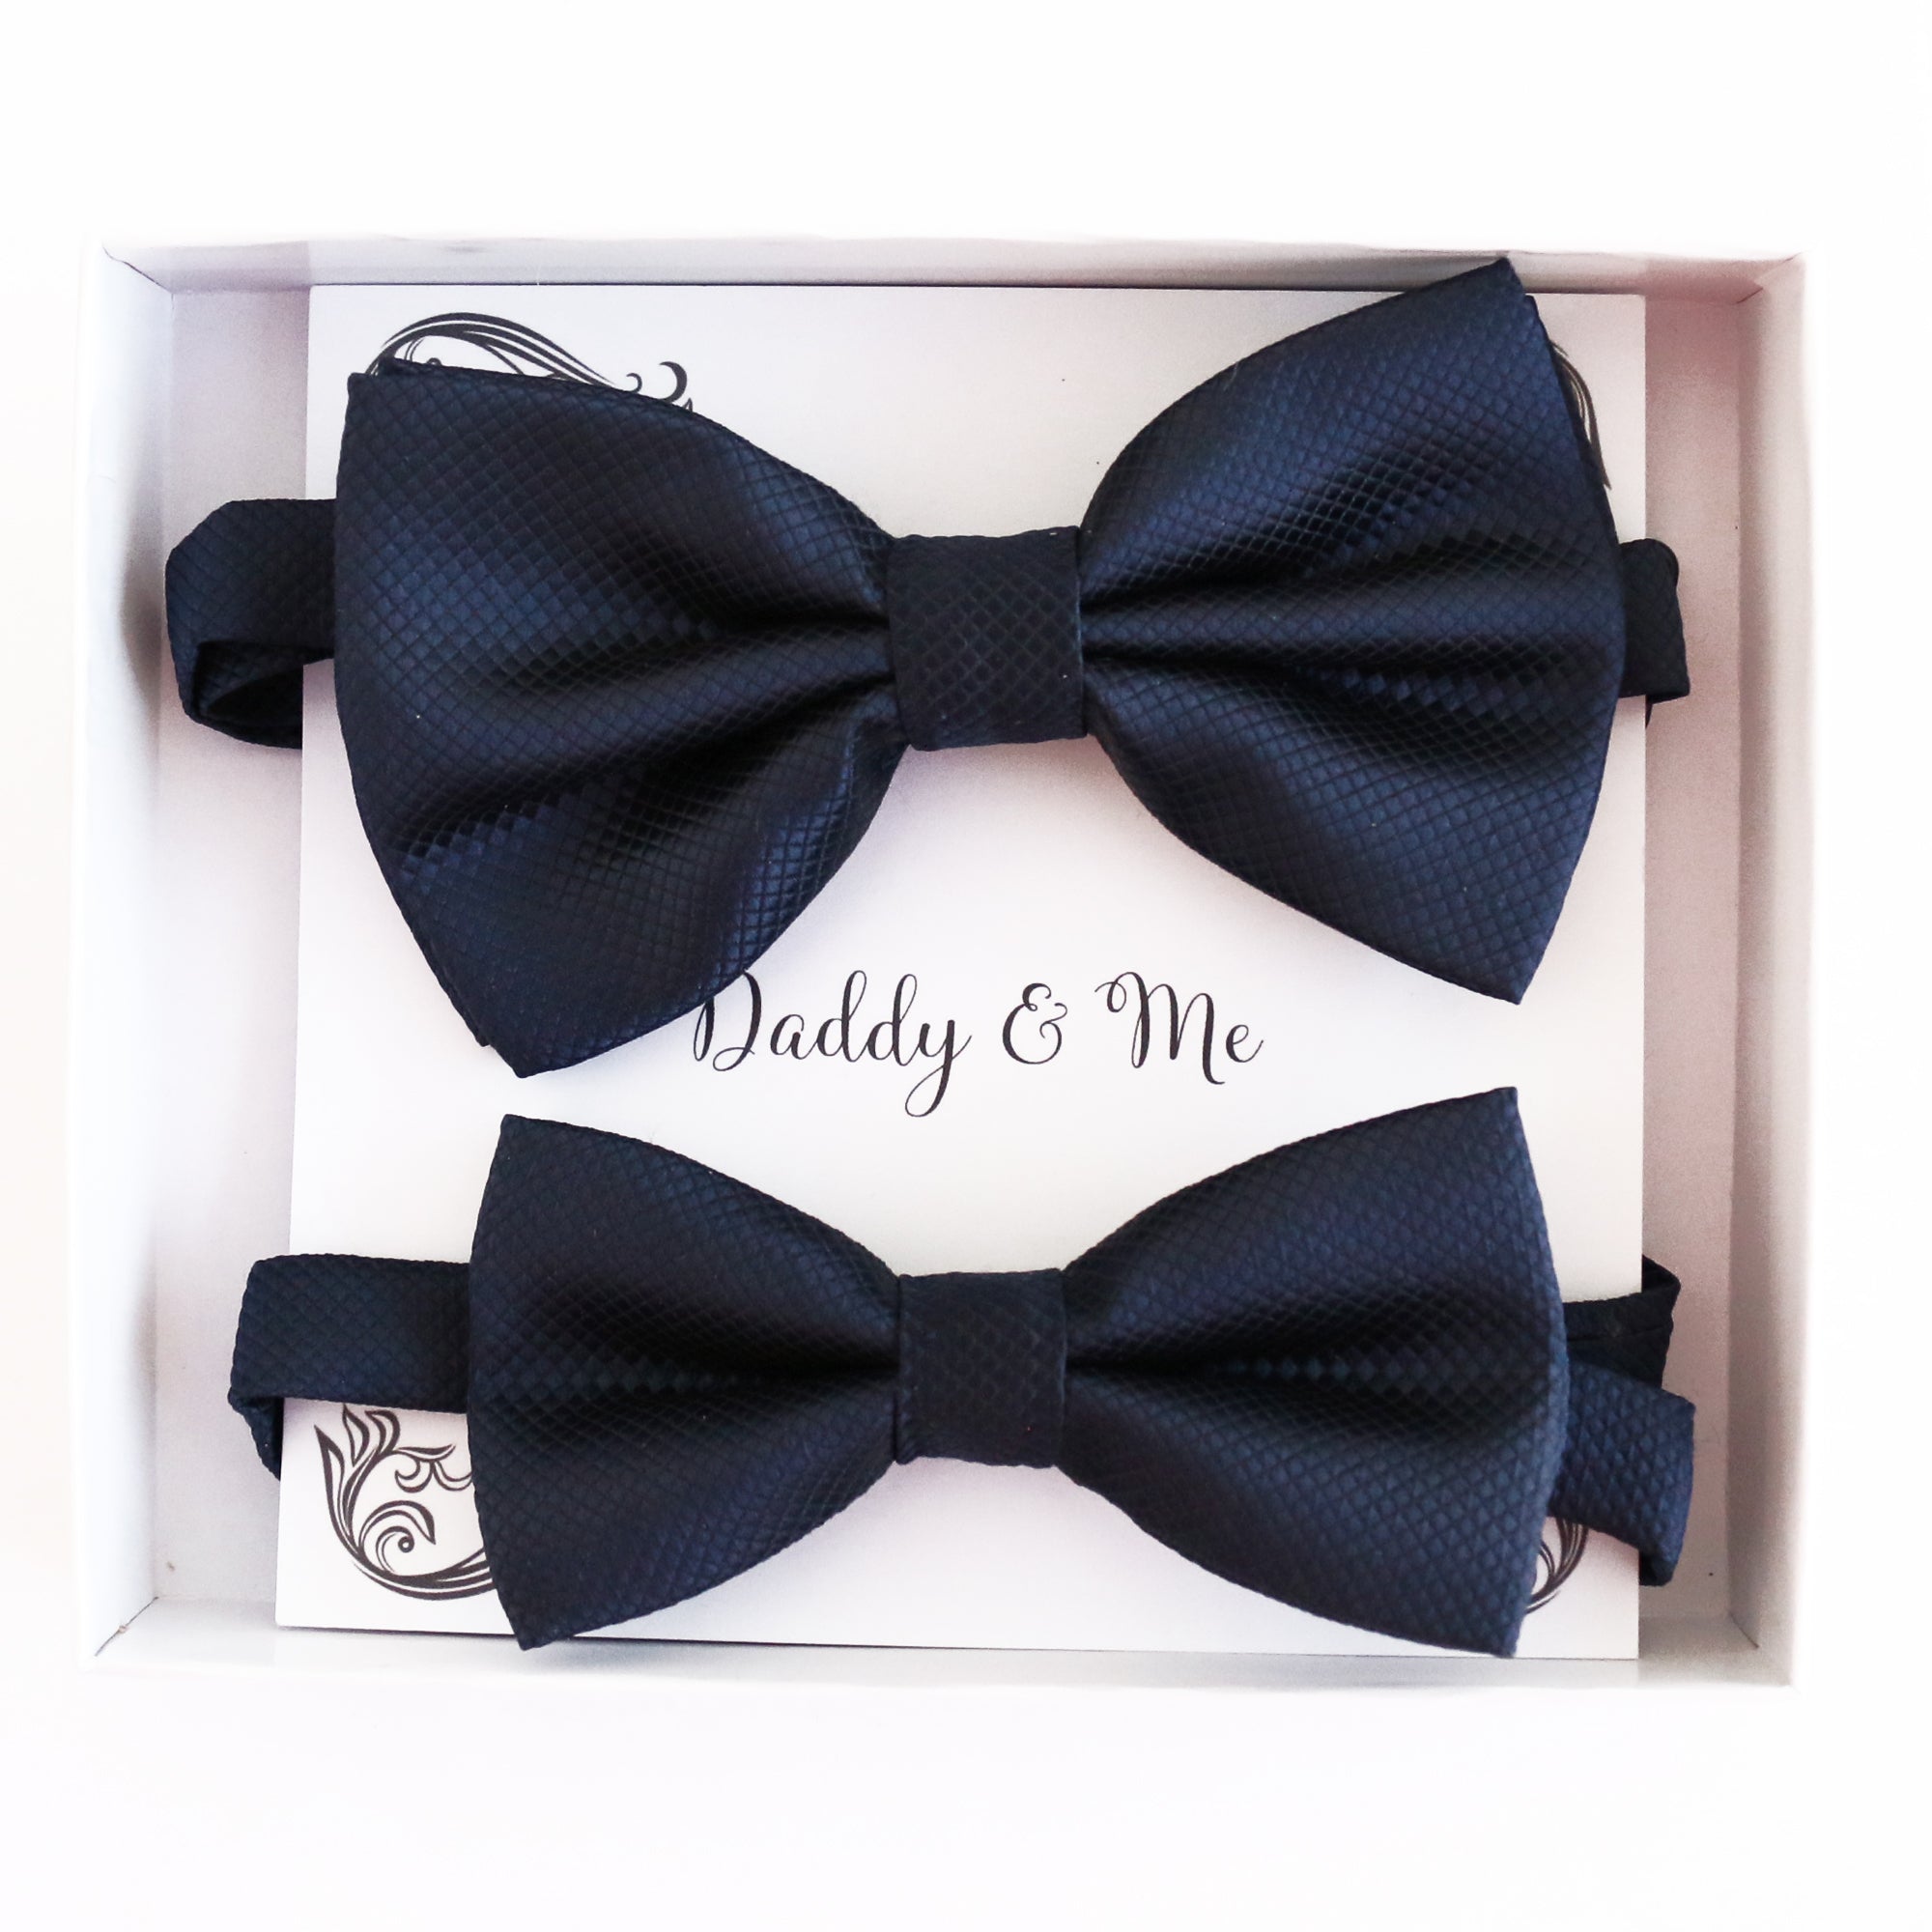 Navy Bow tie set for daddy and son, Daddy and me gift set, Grandpa and me, Some thing blue, Toddler bow tie, daddy and me bow tie gift